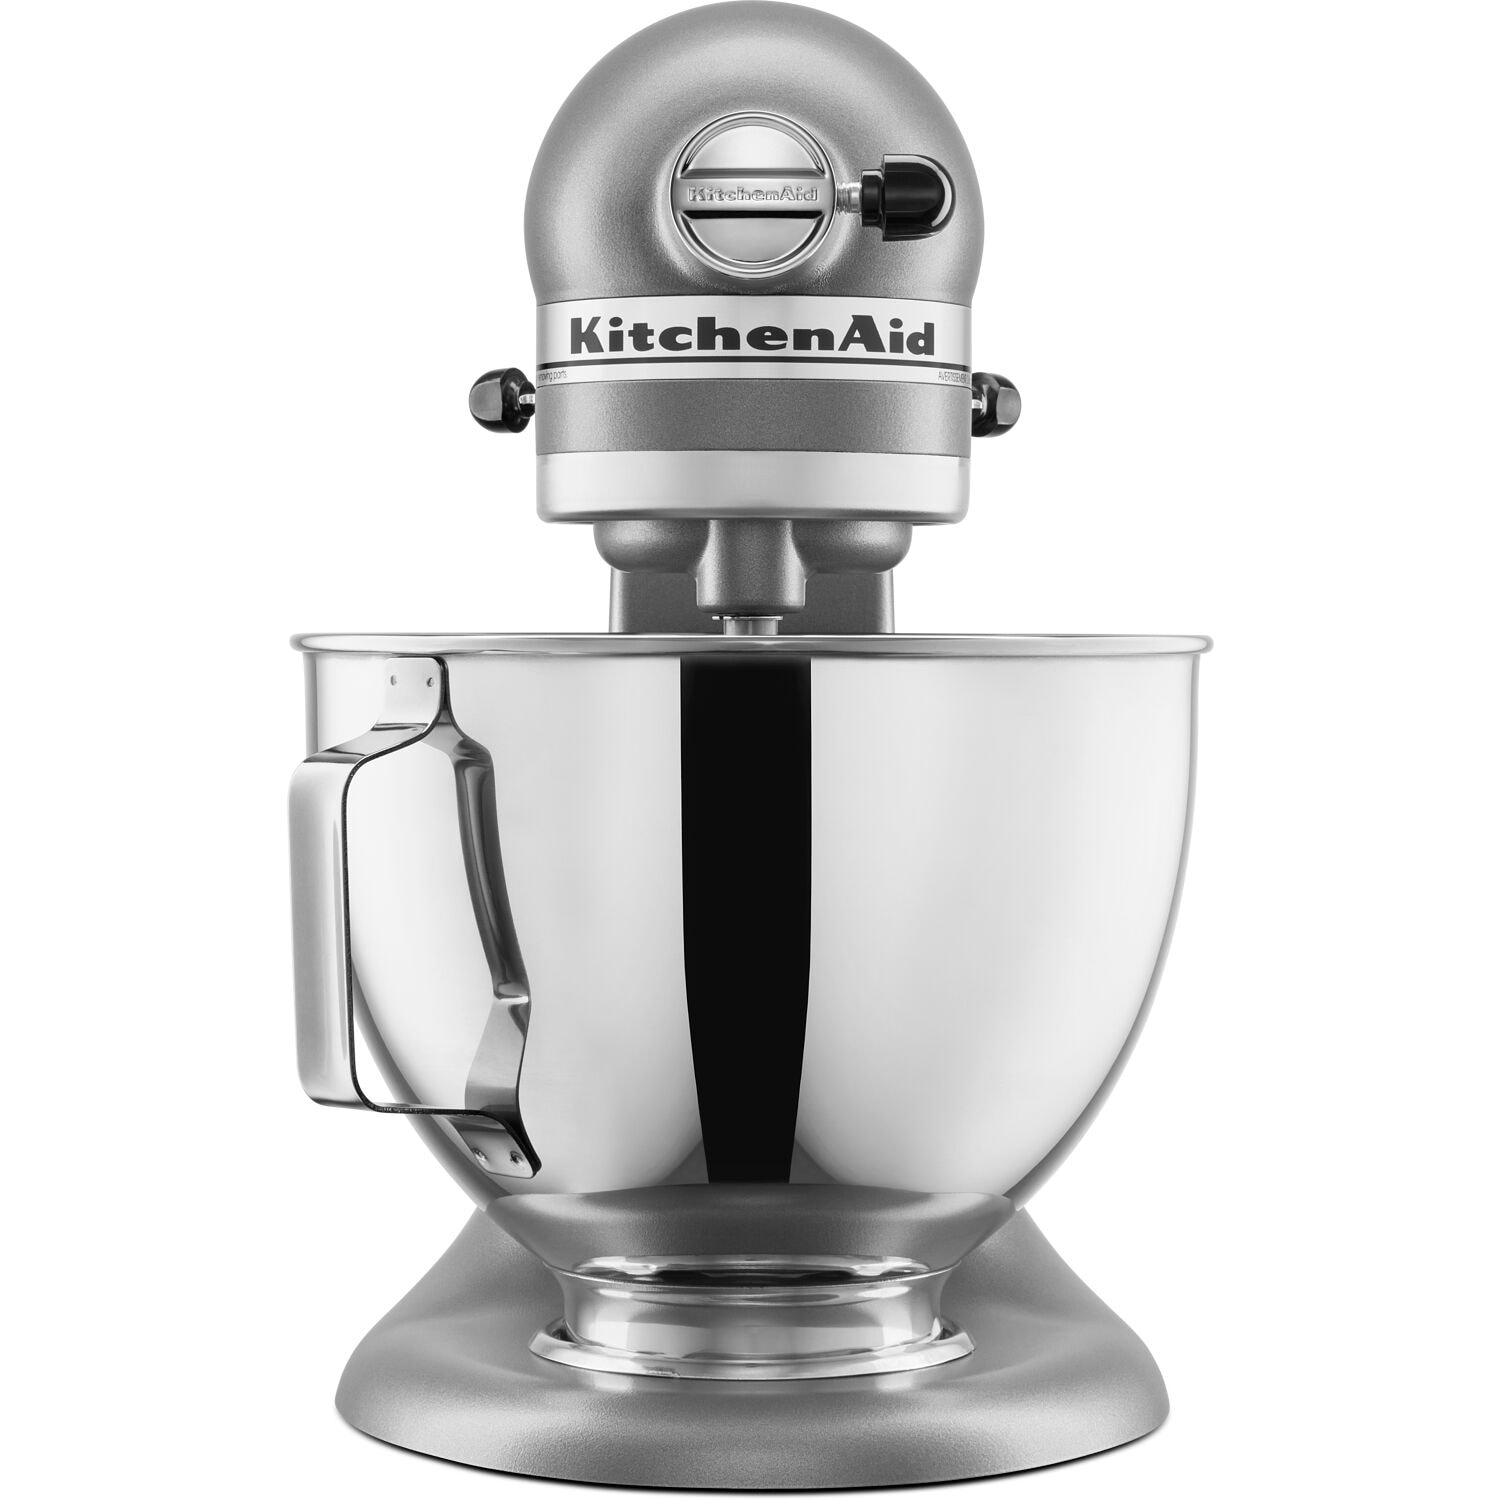 https://ak1.ostkcdn.com/images/products/is/images/direct/5457d270428bb6142eecd3aa3527f982f67449e6/KitchenAid-Deluxe-4.5-Quart-Tilt-Head-Stand-Mixer-in-Silver.jpg